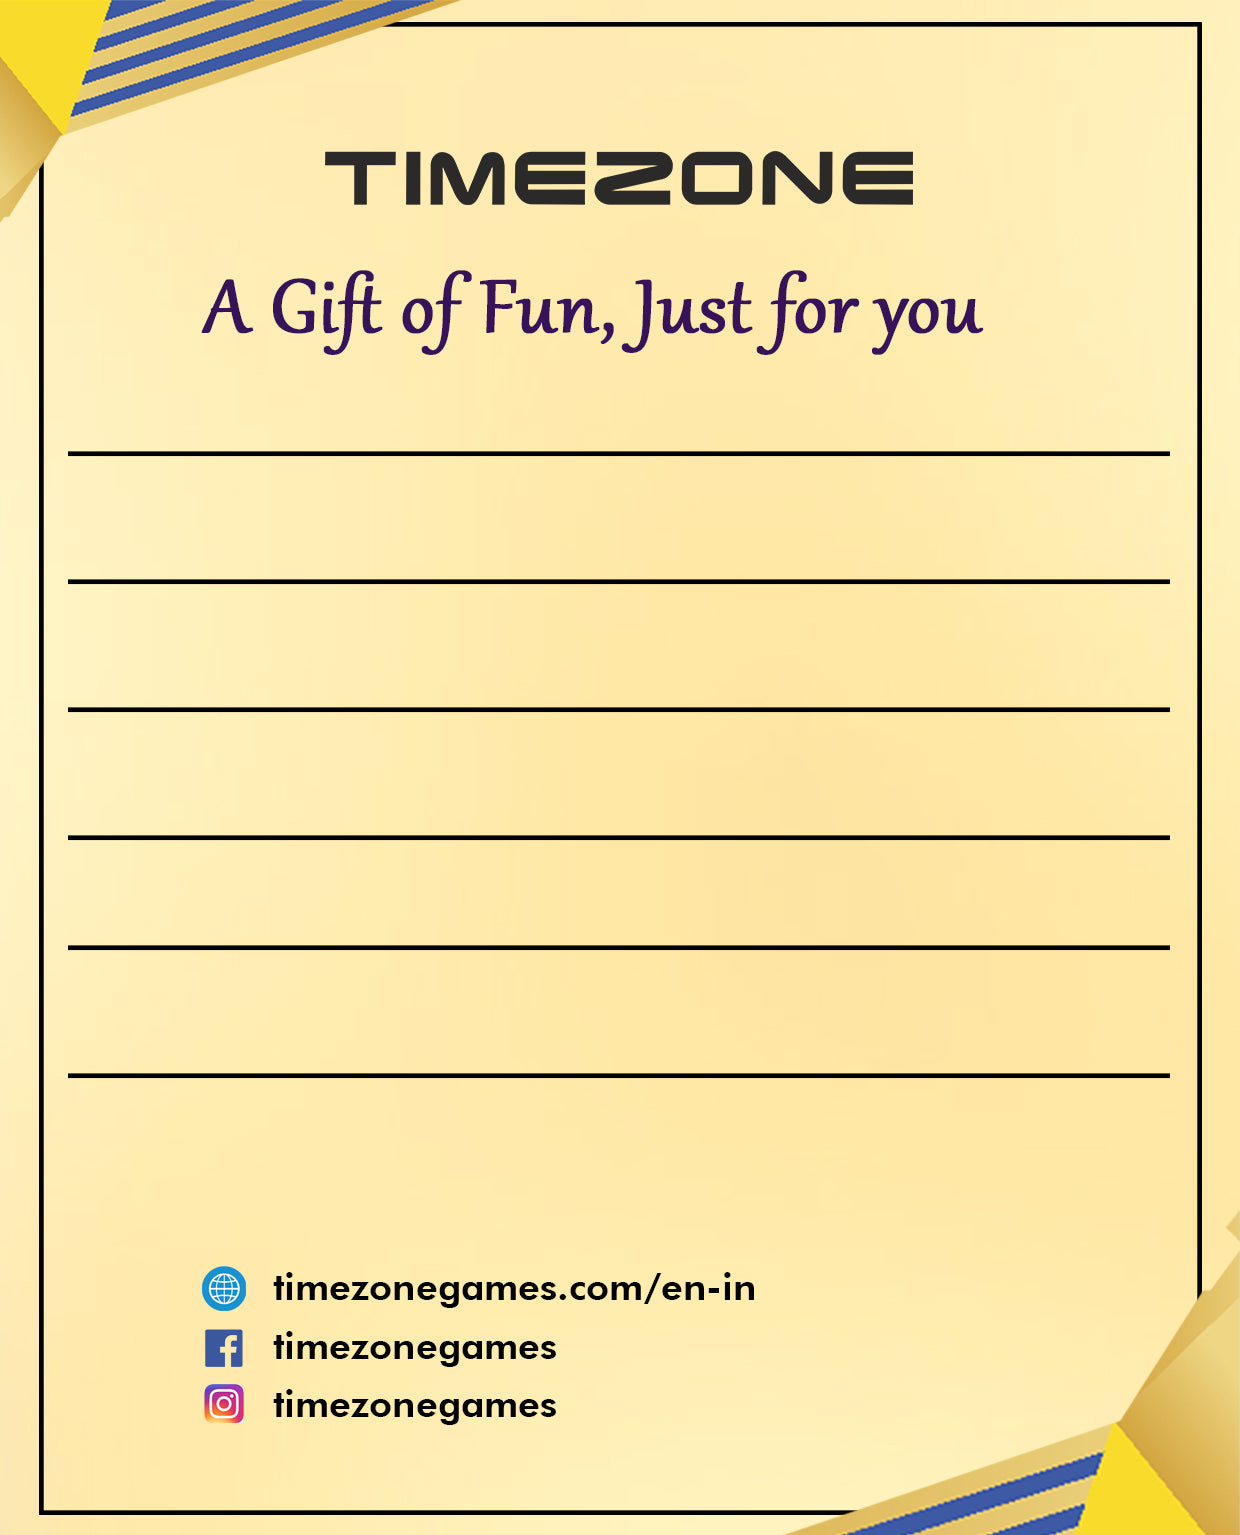 Timezone Gift Card